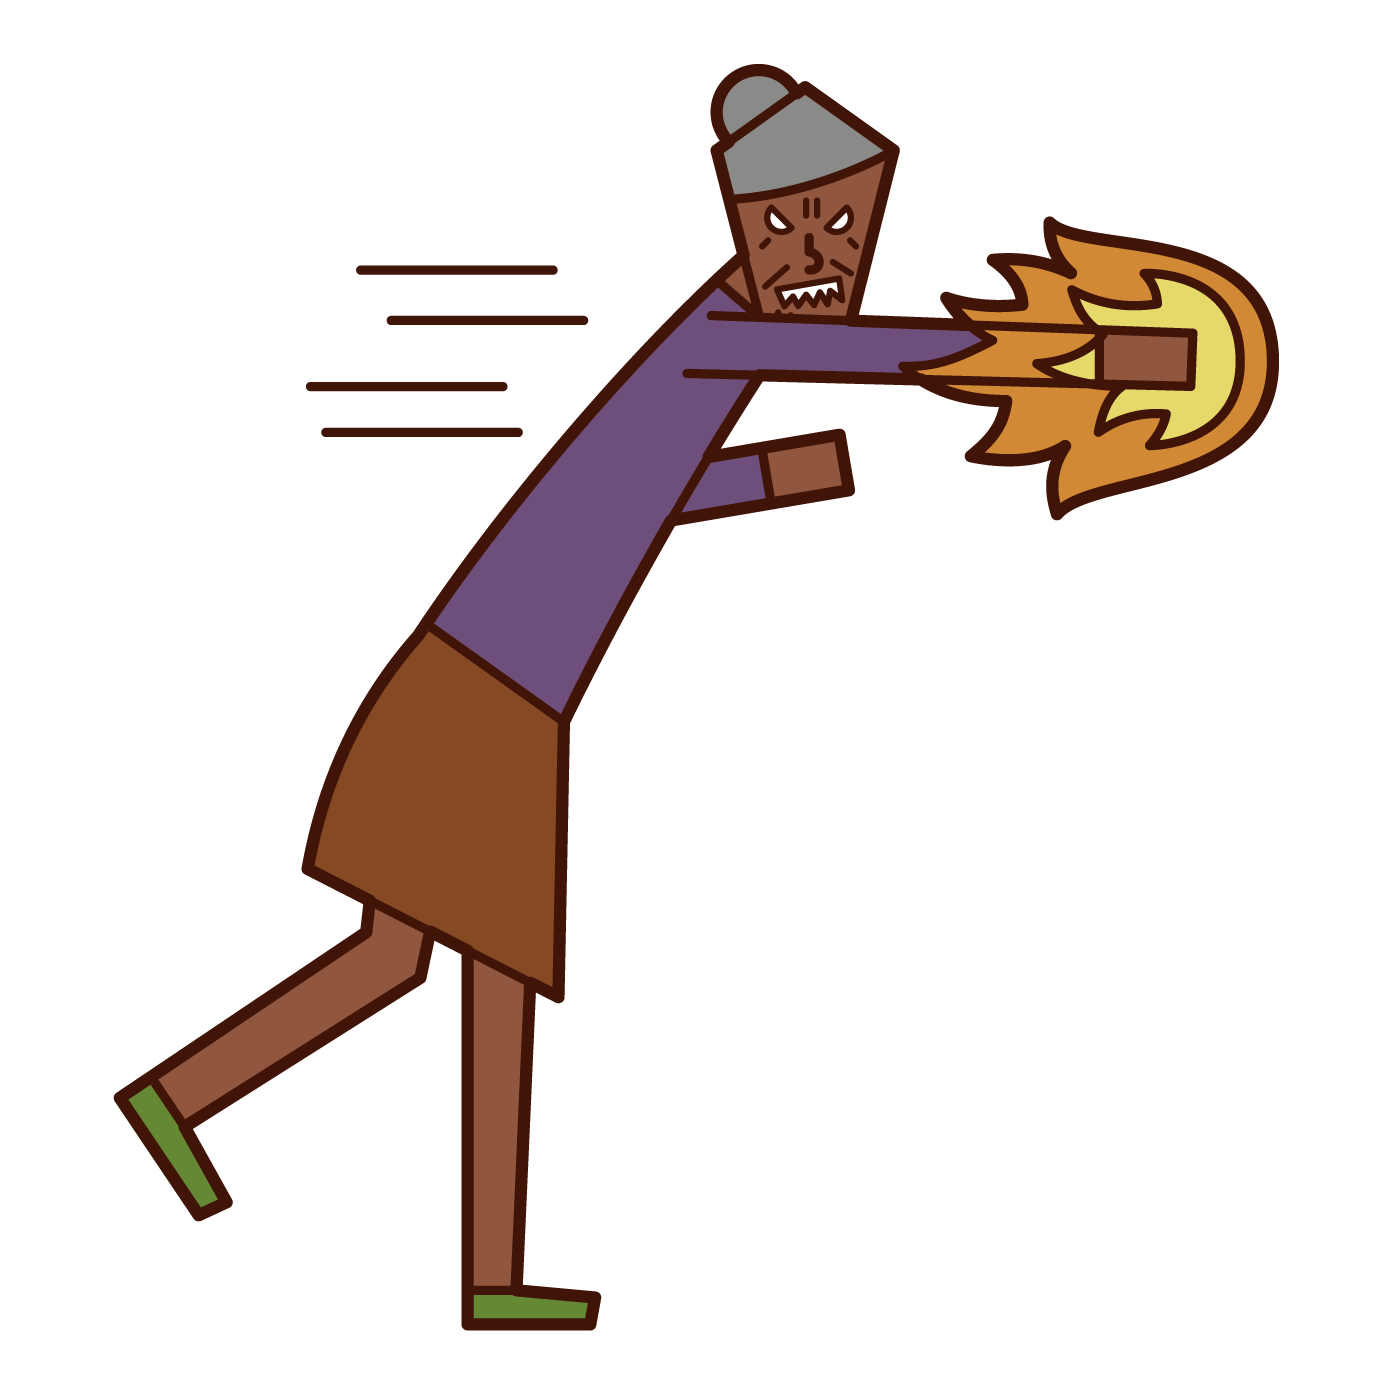 Illustration of a person (grandmother) who shoots a punch of anger